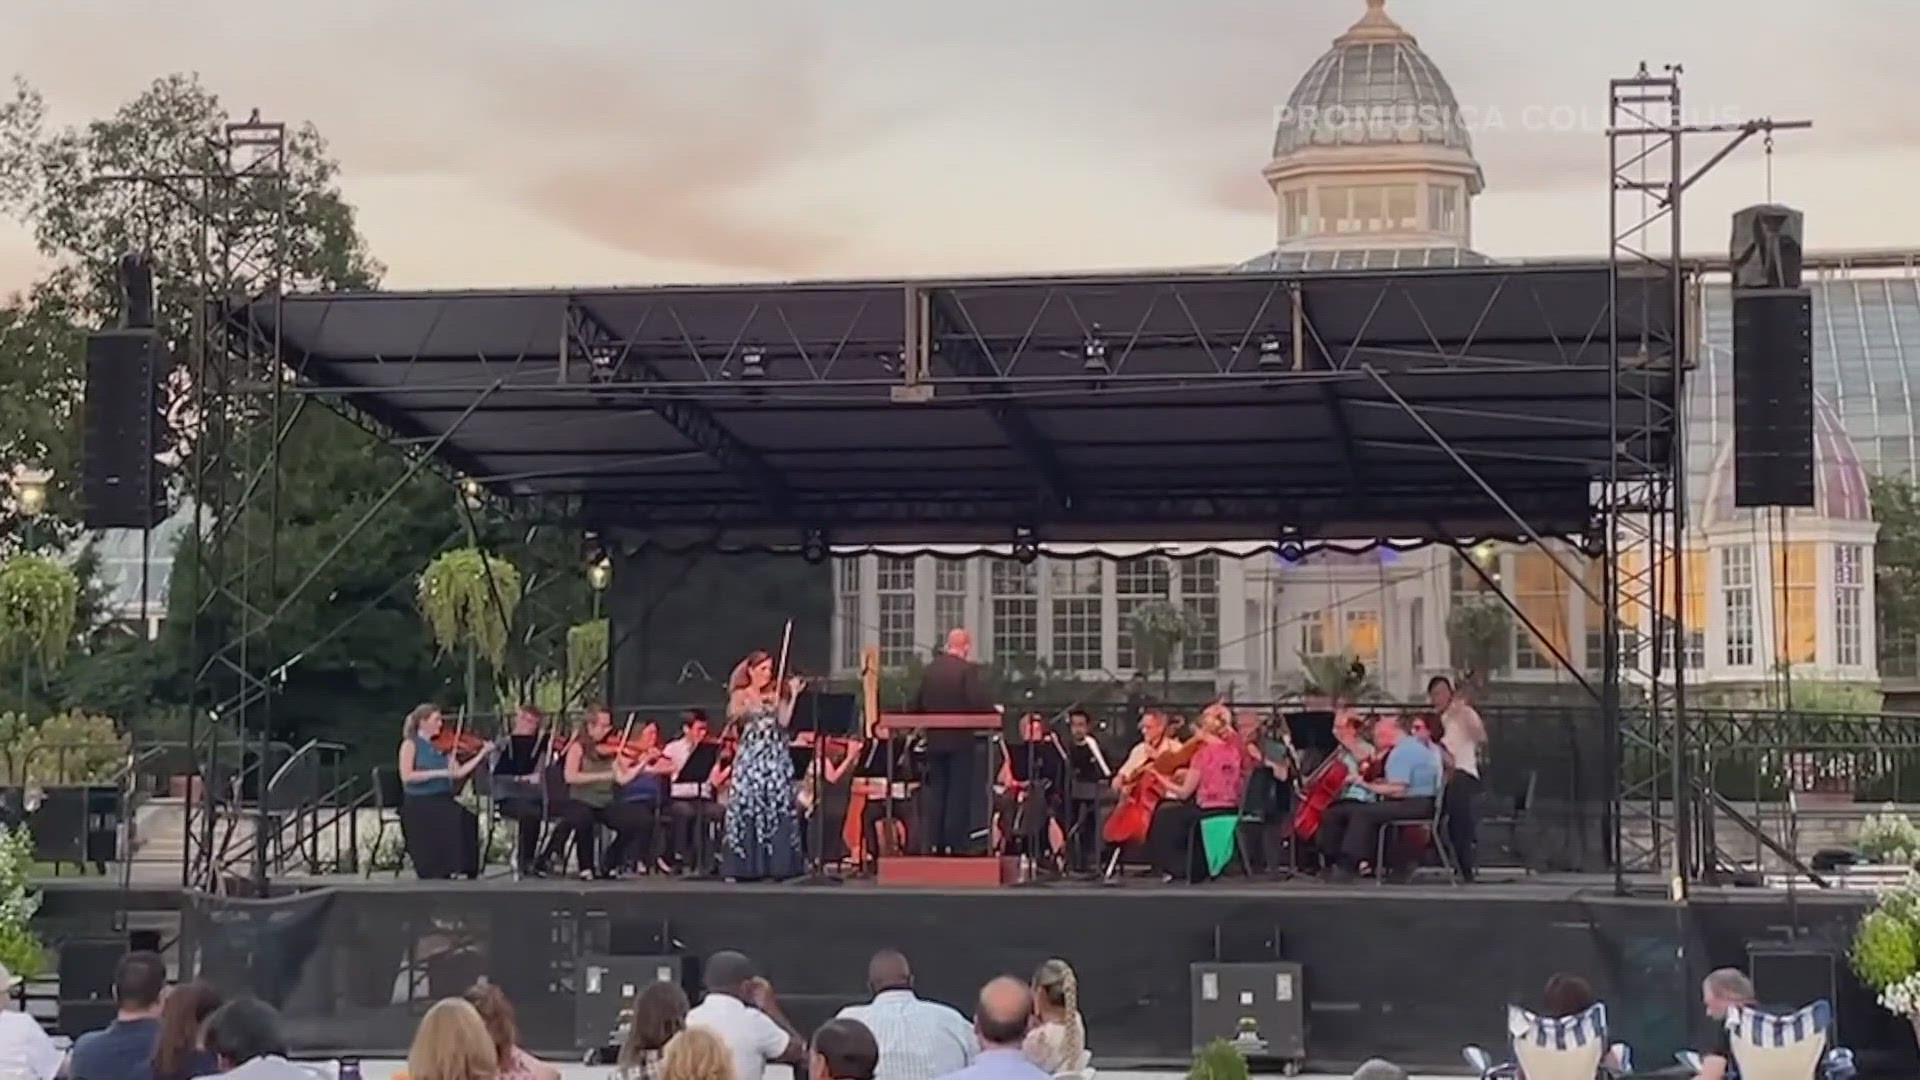 The ProMusica Chamber Orchestra will perform shows at the Alum Creek Park Amphitheater and Franklin Park Conservatory.